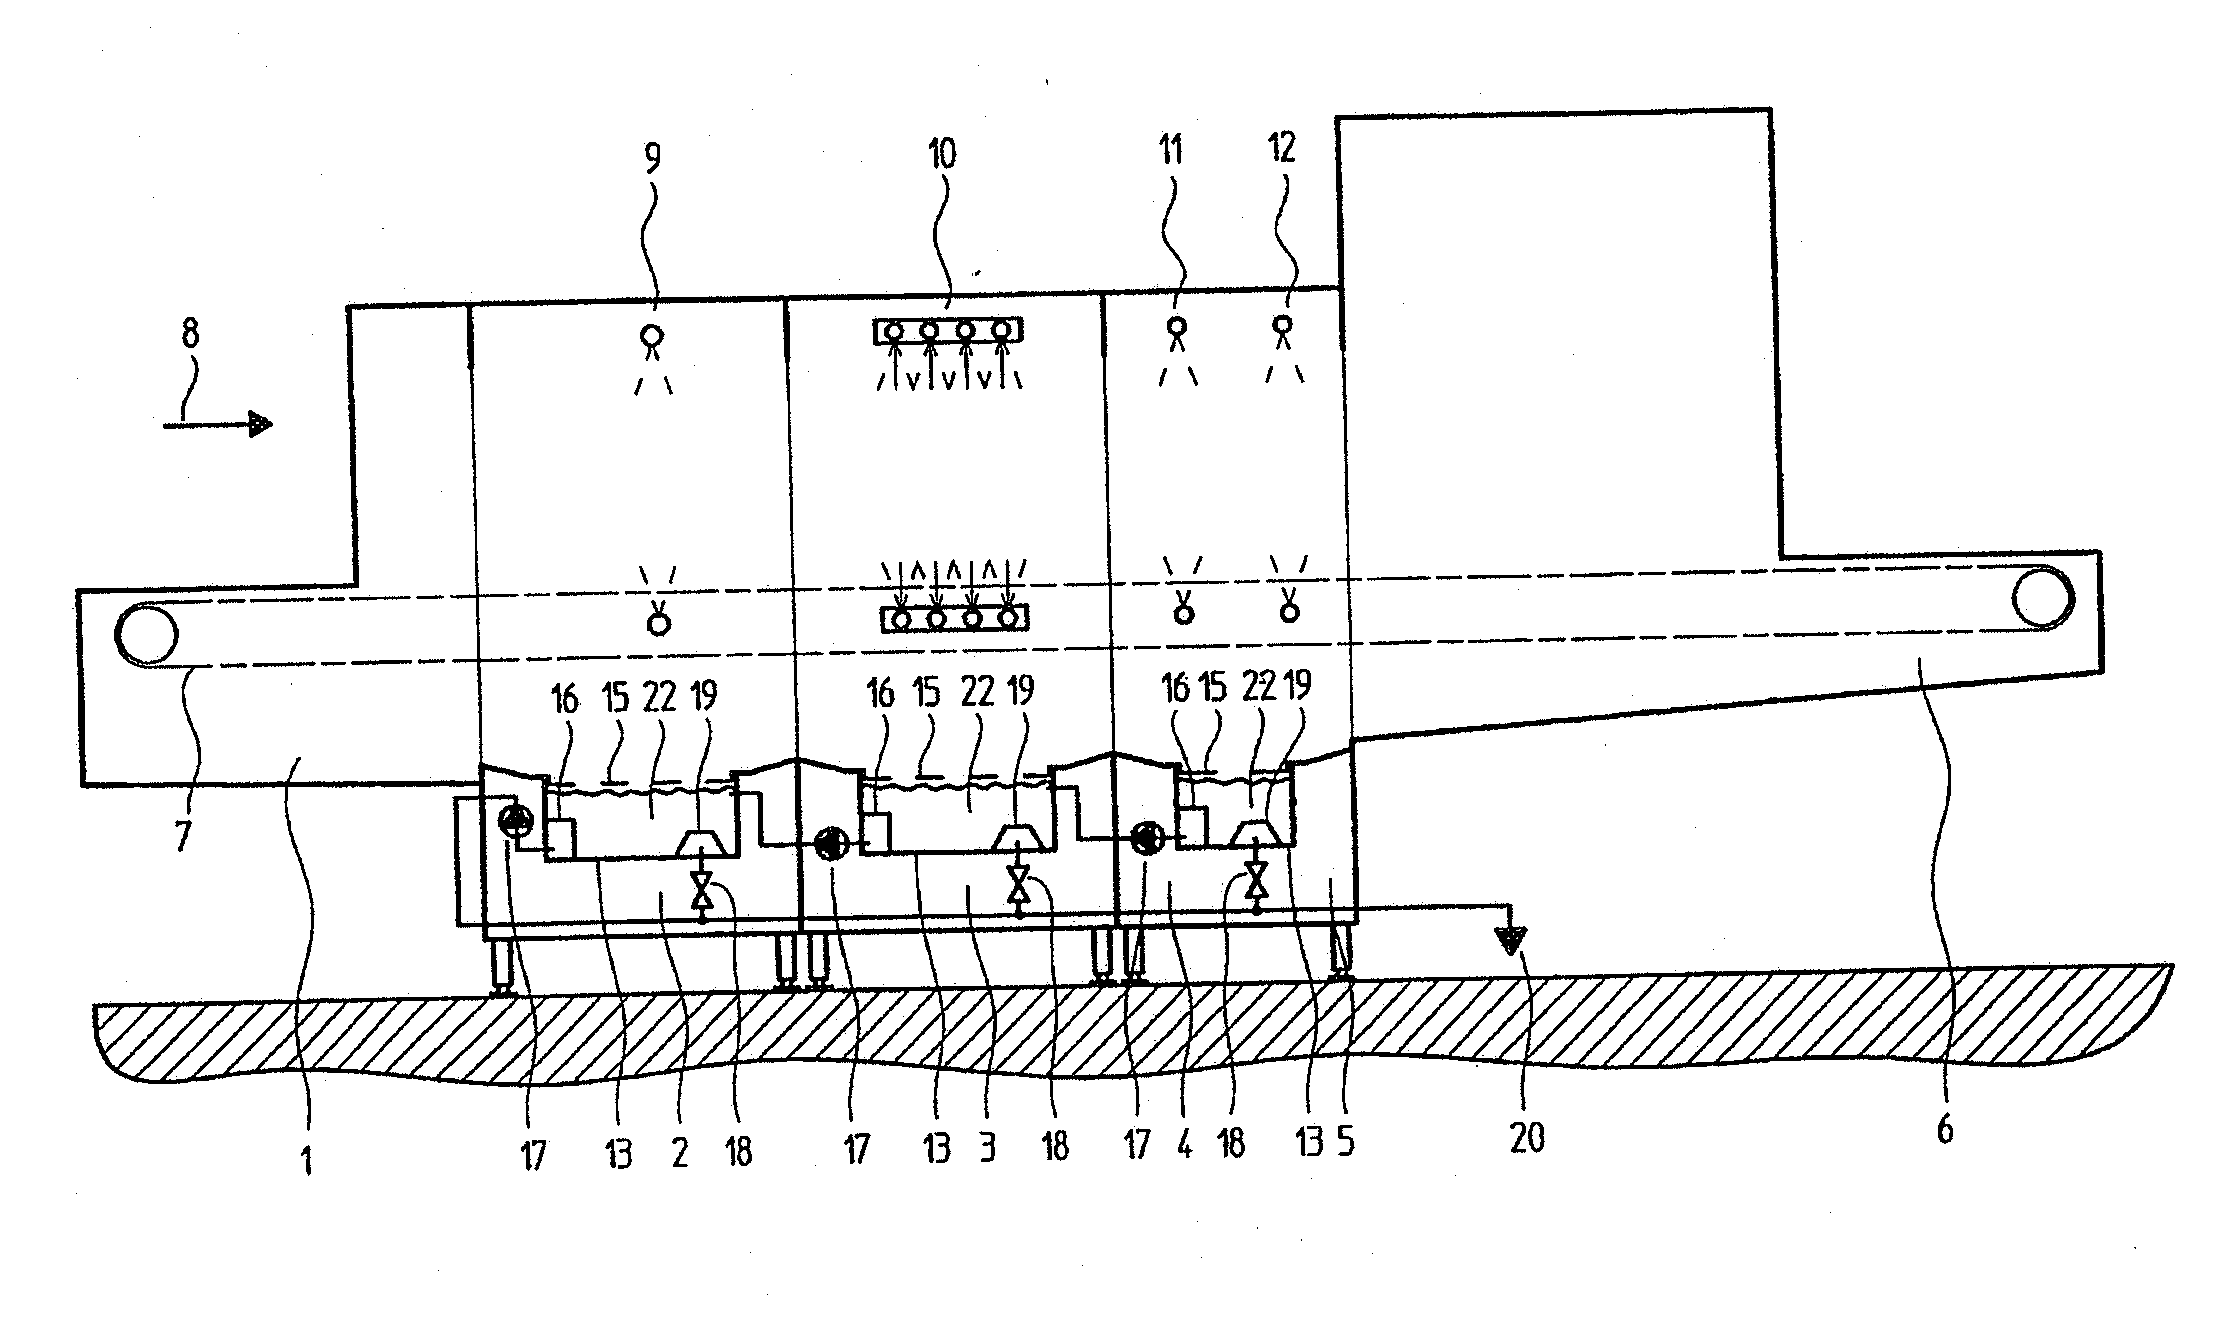 Method for self-cleaning of a continuous dishwasher